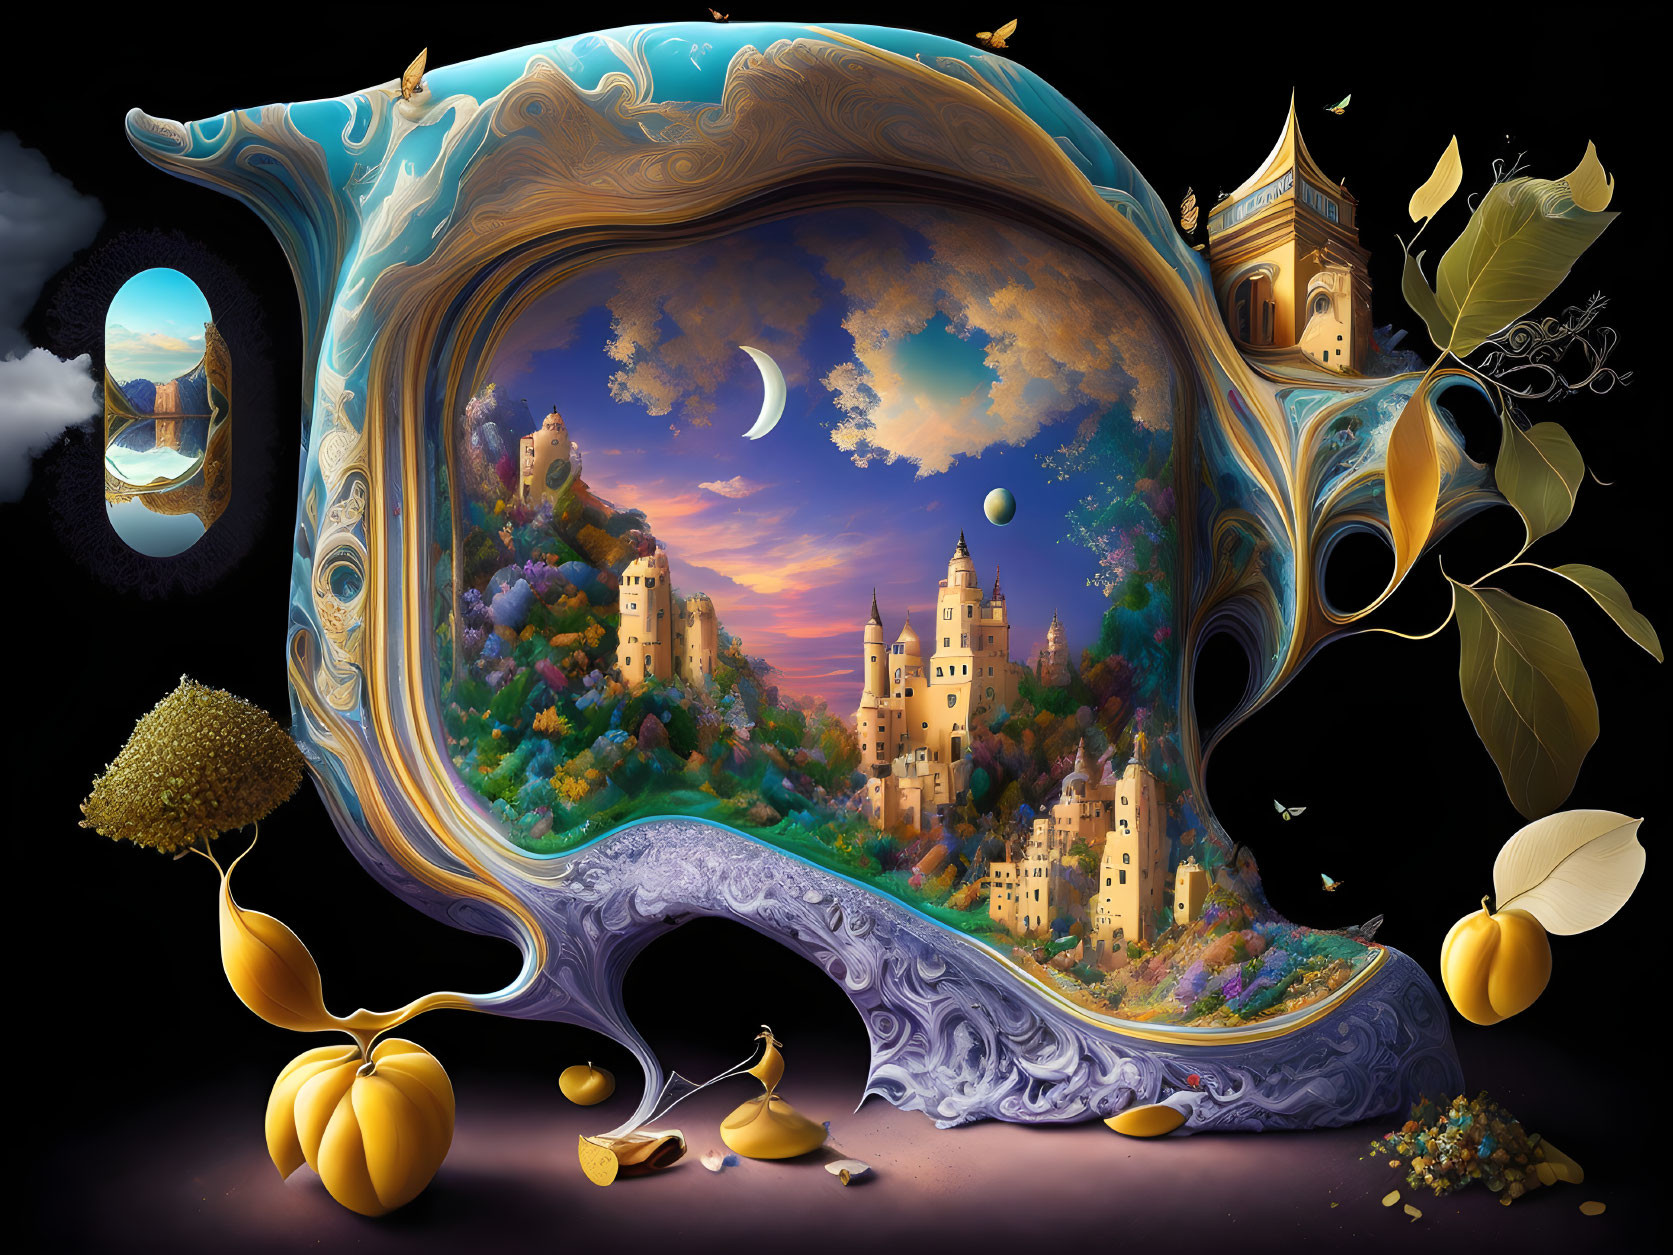 Surreal fantasy scene with castles, moonlit sky, whimsical trees, and golden fruits